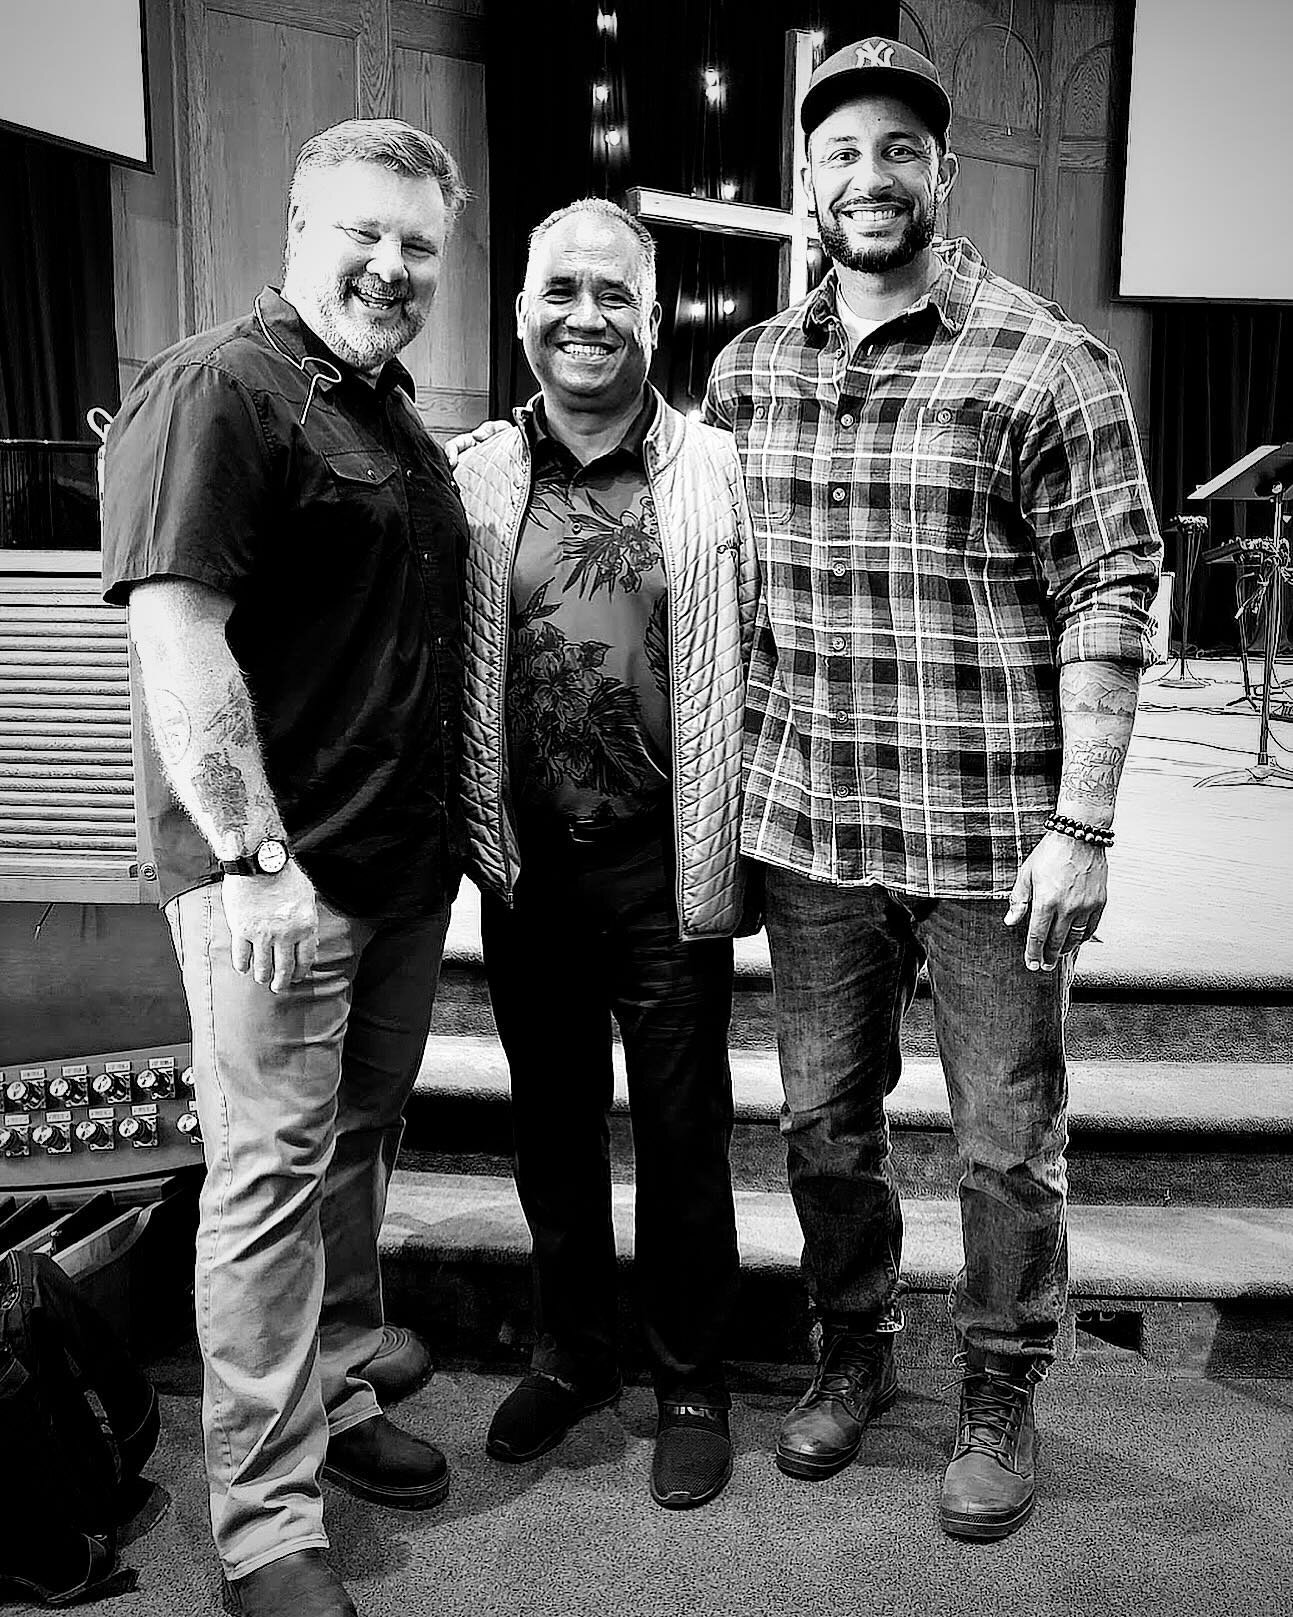 Had a visit from the westside a few weeks ago. Thankful for Pastor Al (middle) &amp; Antioch Bible Church. This is a church that loved me &amp; my family when things were really tough. 

I now serve Jesus in Spokane through Uber &amp; at Fourth Memor